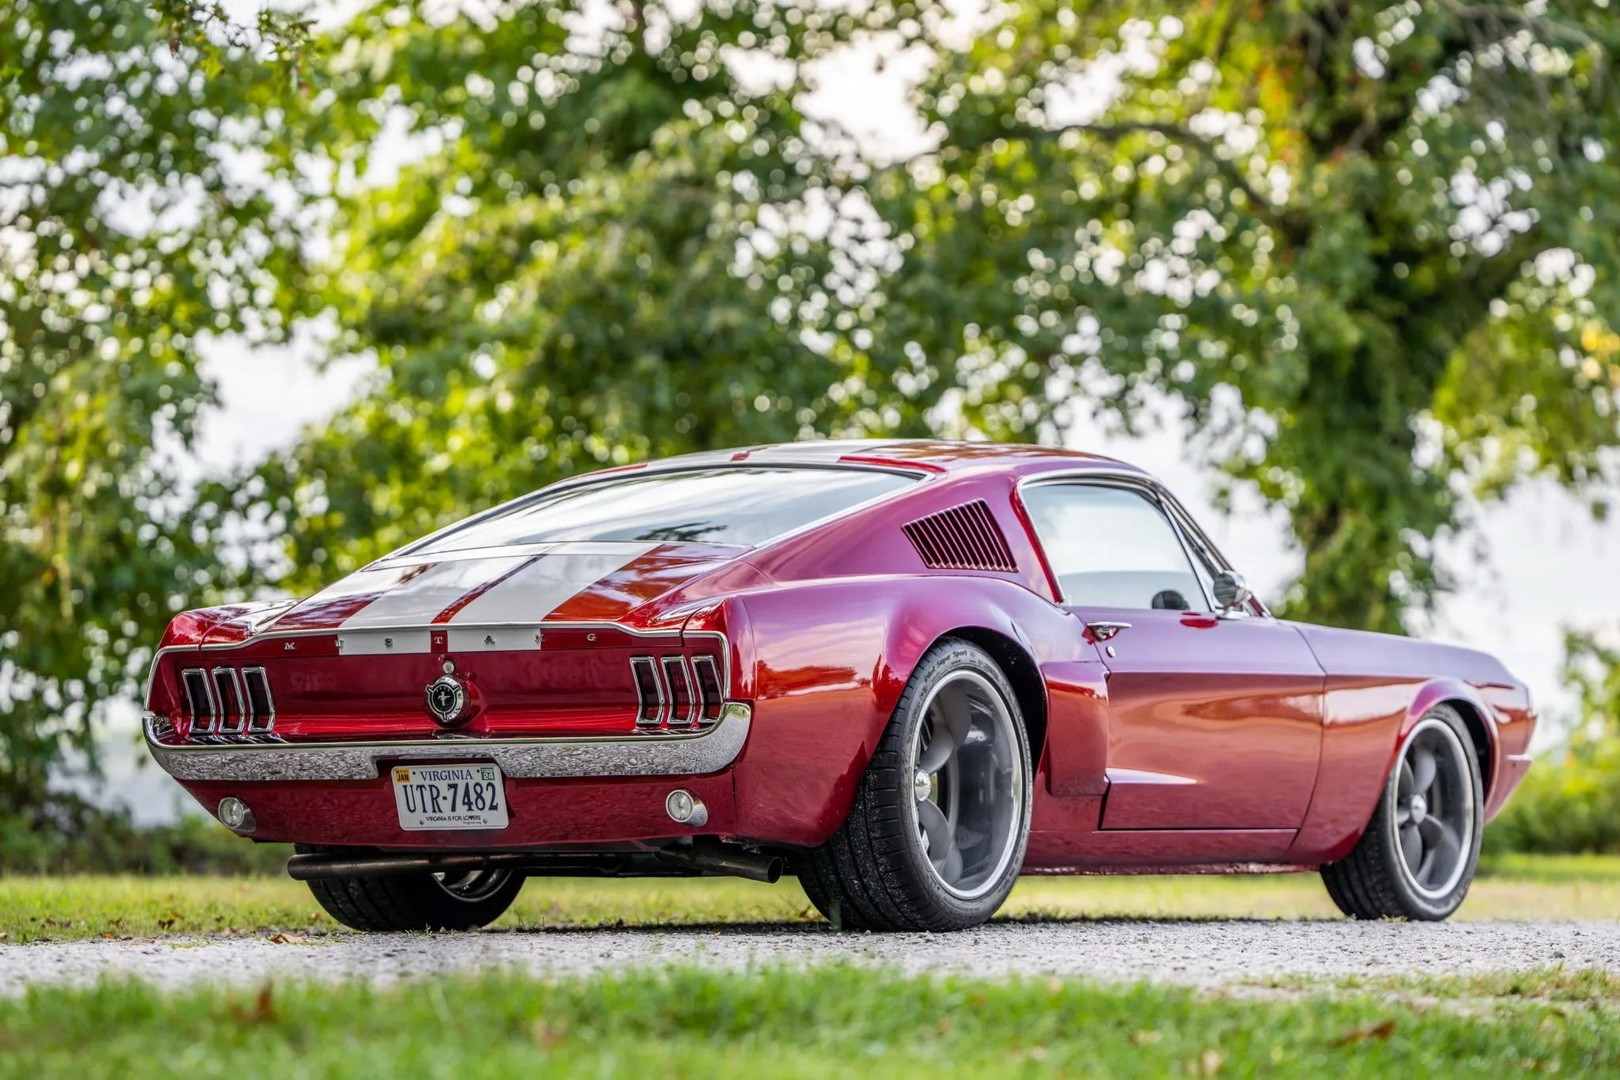 One-of-a-Kind 1967 Ford Mustang Looks Like an Aston Martin V8 Vantage / Ford GT Love Child - autoevolution